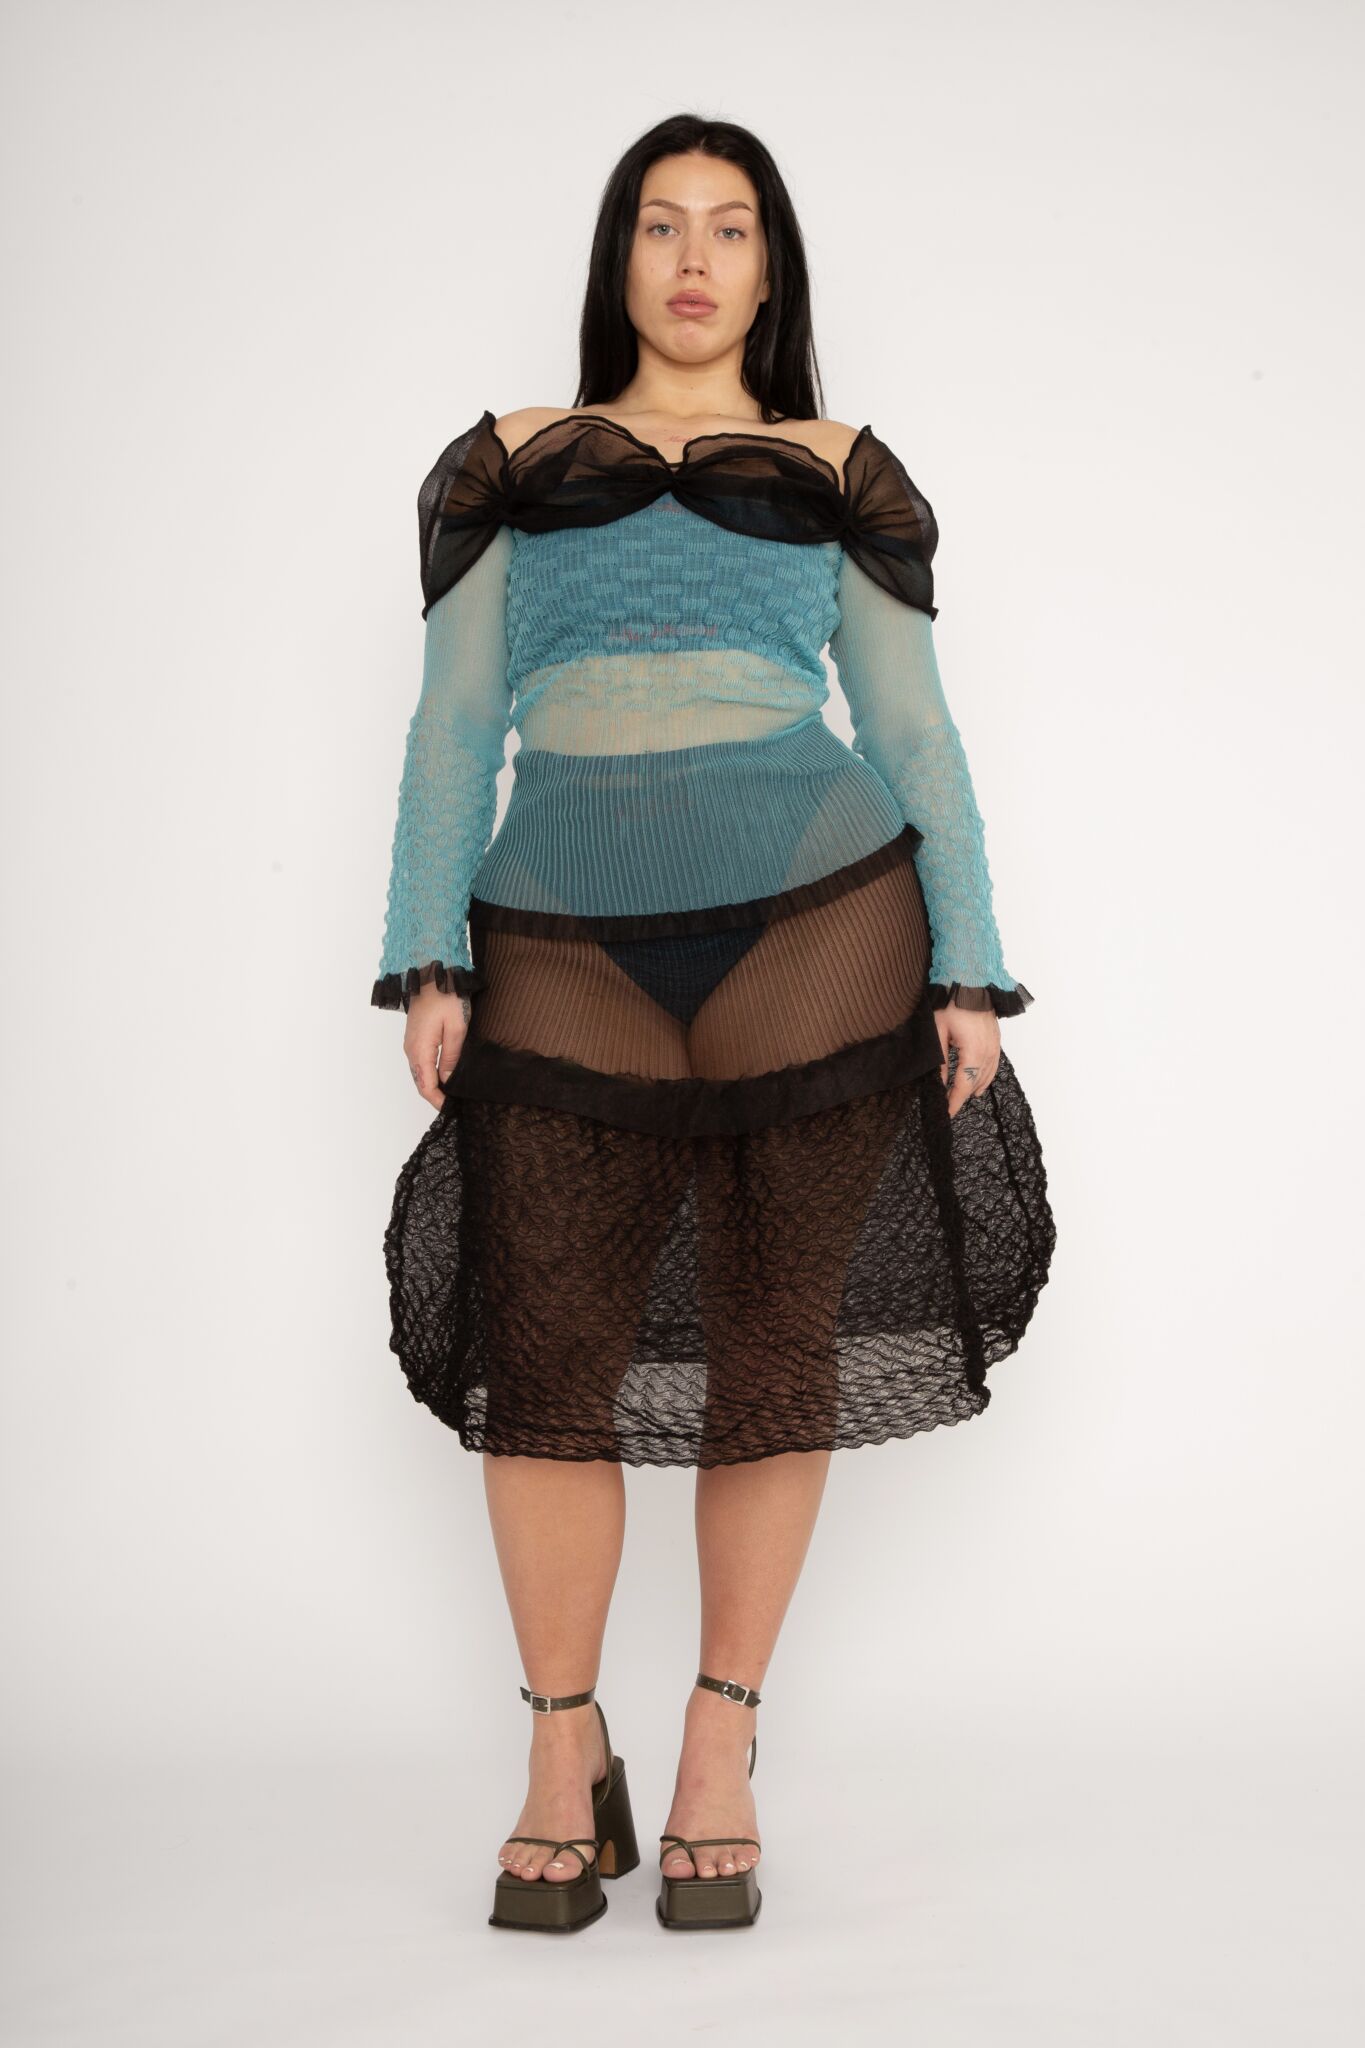 Bubble Bell Top in teal and black is a transparent knitted off-shoulder top in a ribbed bubble texture with ruffles and bell sleeves. The top has a close fit body with long sleeves and a voluminous adjustable neckline detailed with a melange rim with a logo in the back. The textile is lightweight, delicate and very flexible, meaning the dress adapts to body wearing it. The Bubble Bell Top is also available in khaki and comes in 2 different sizes.